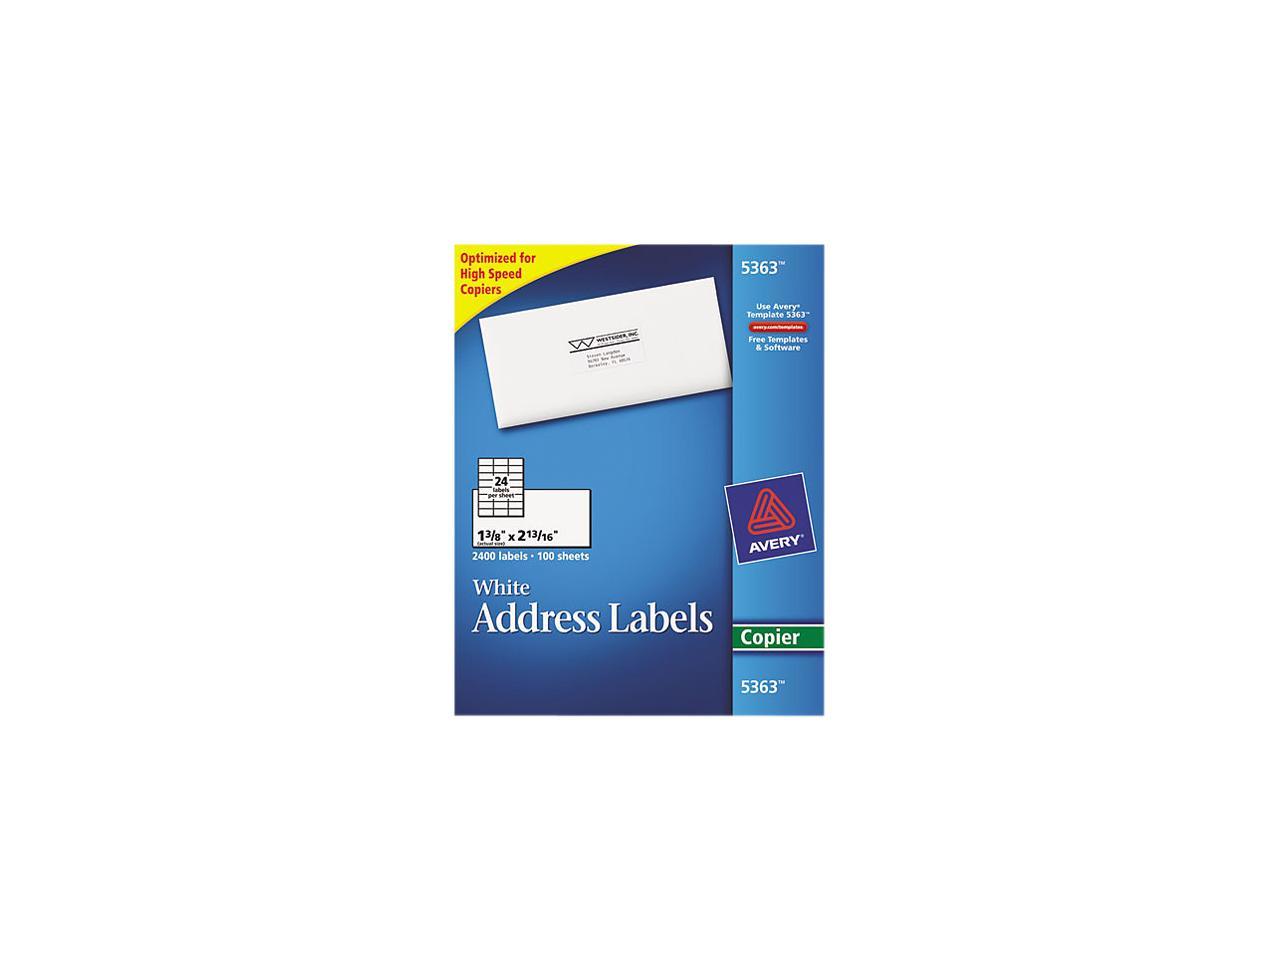 Avery 5363 SelfAdhesive Address Labels for Copiers, 13/8 x 213/16